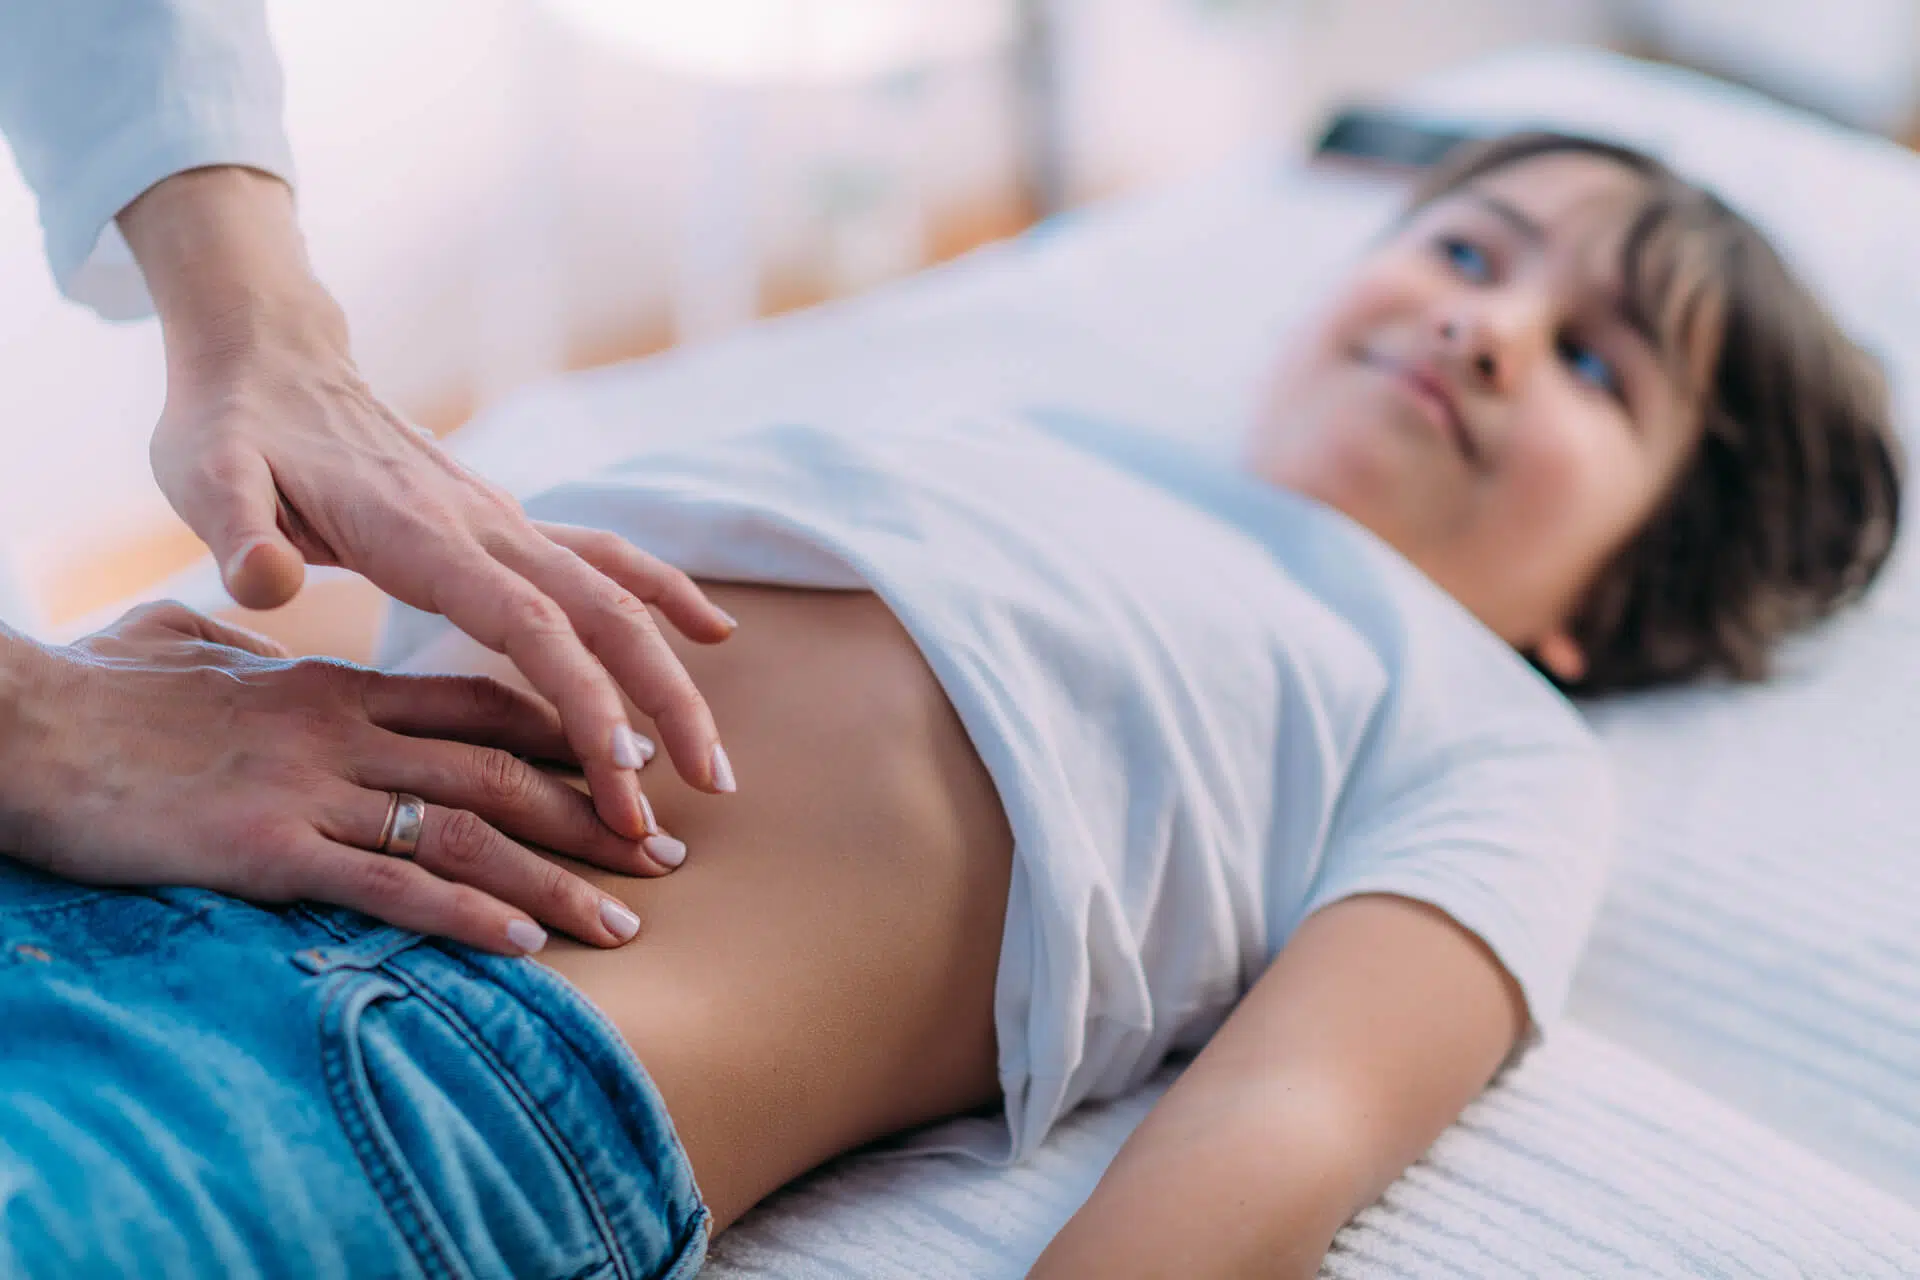 Read More About The Article 4 Major Pelvic Issues Mostly Identified By Physical Therapists